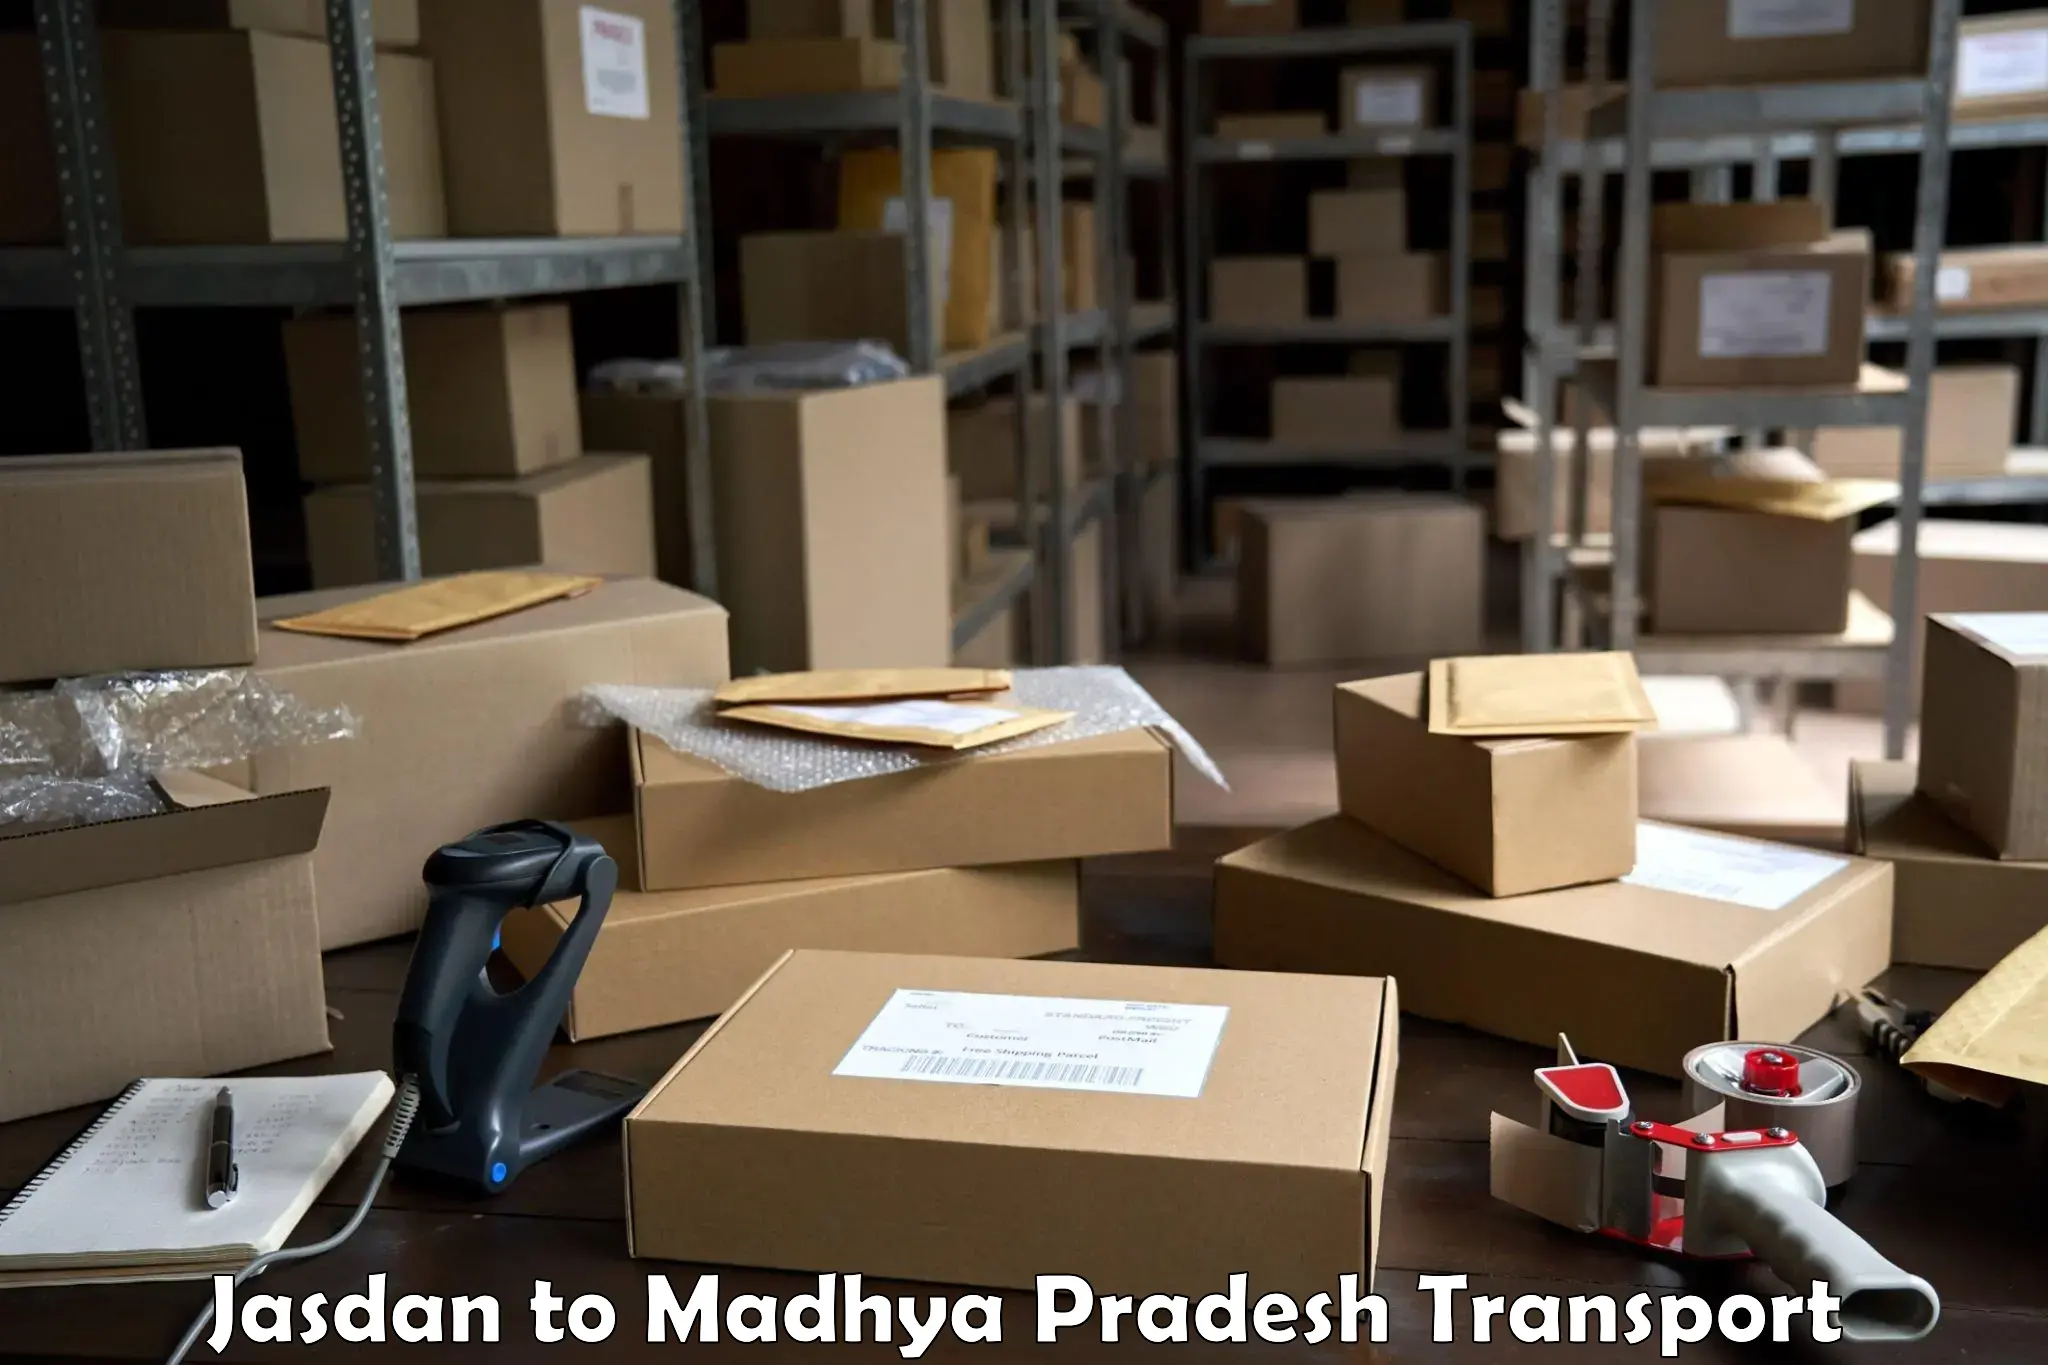 Truck transport companies in India Jasdan to Gwalior